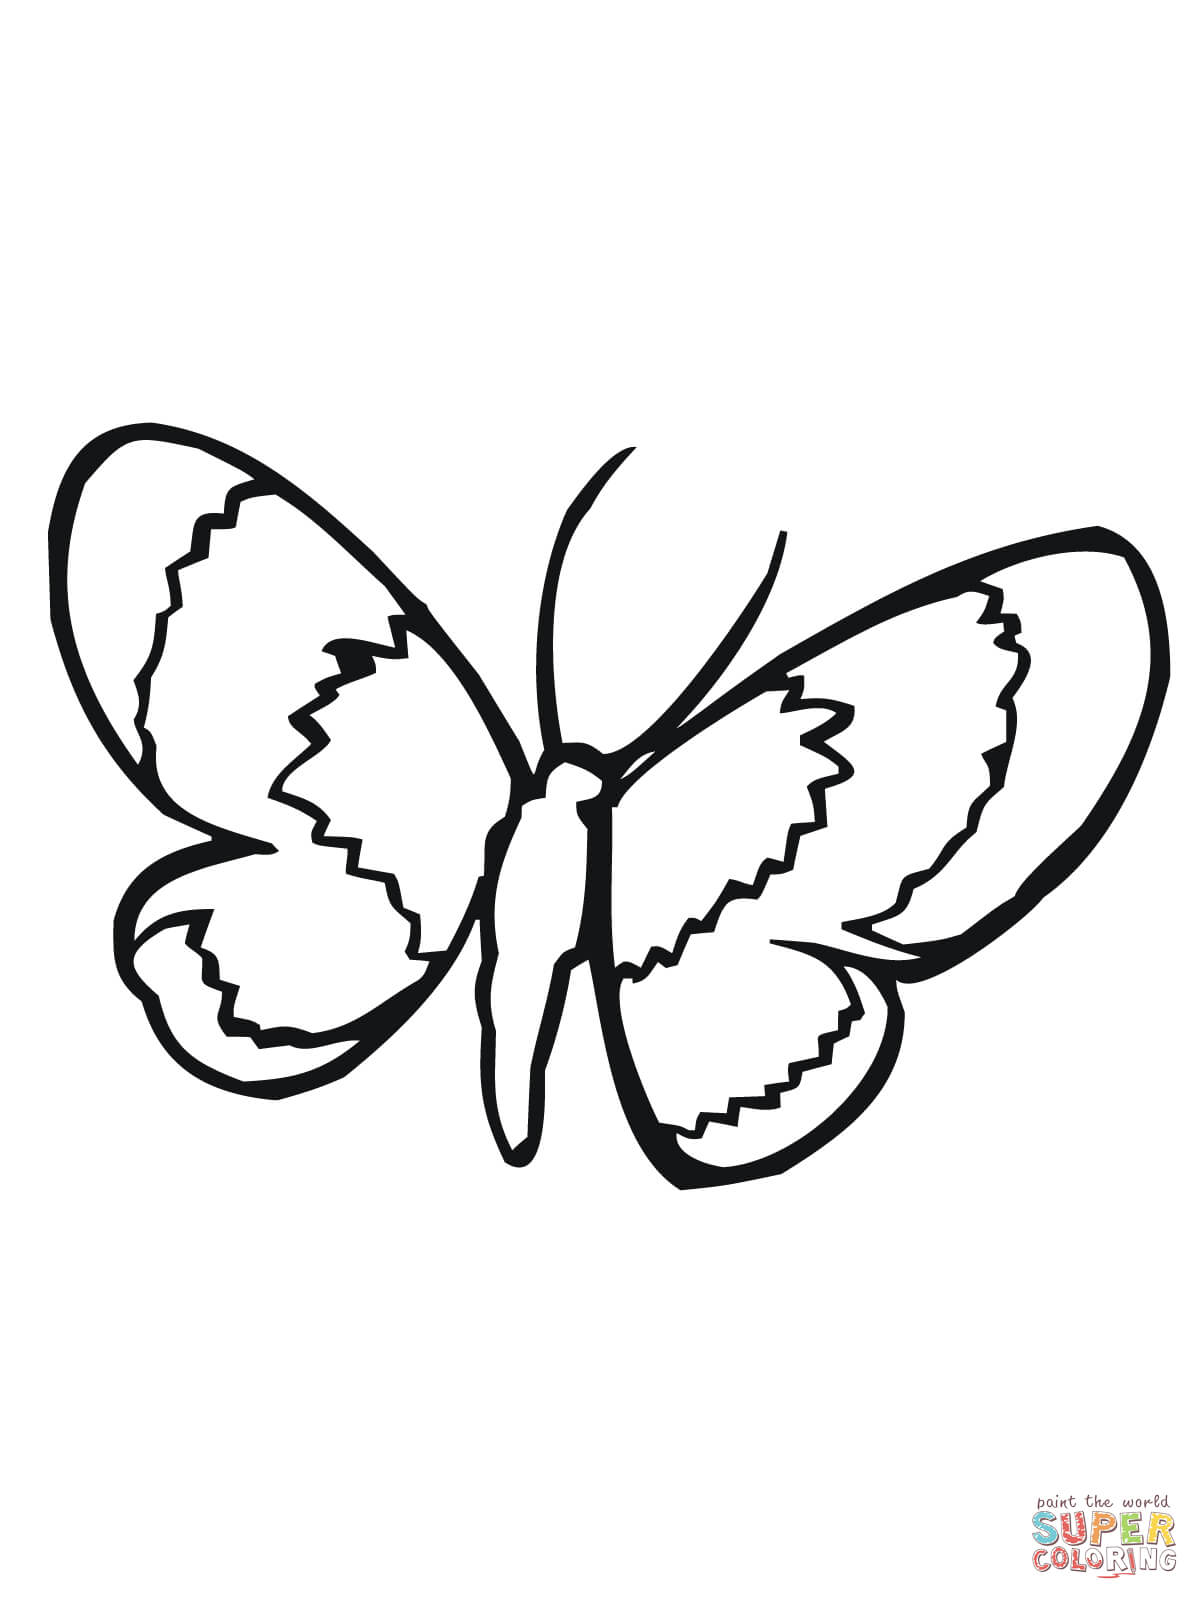 Moth coloring pages | Free Coloring Pages